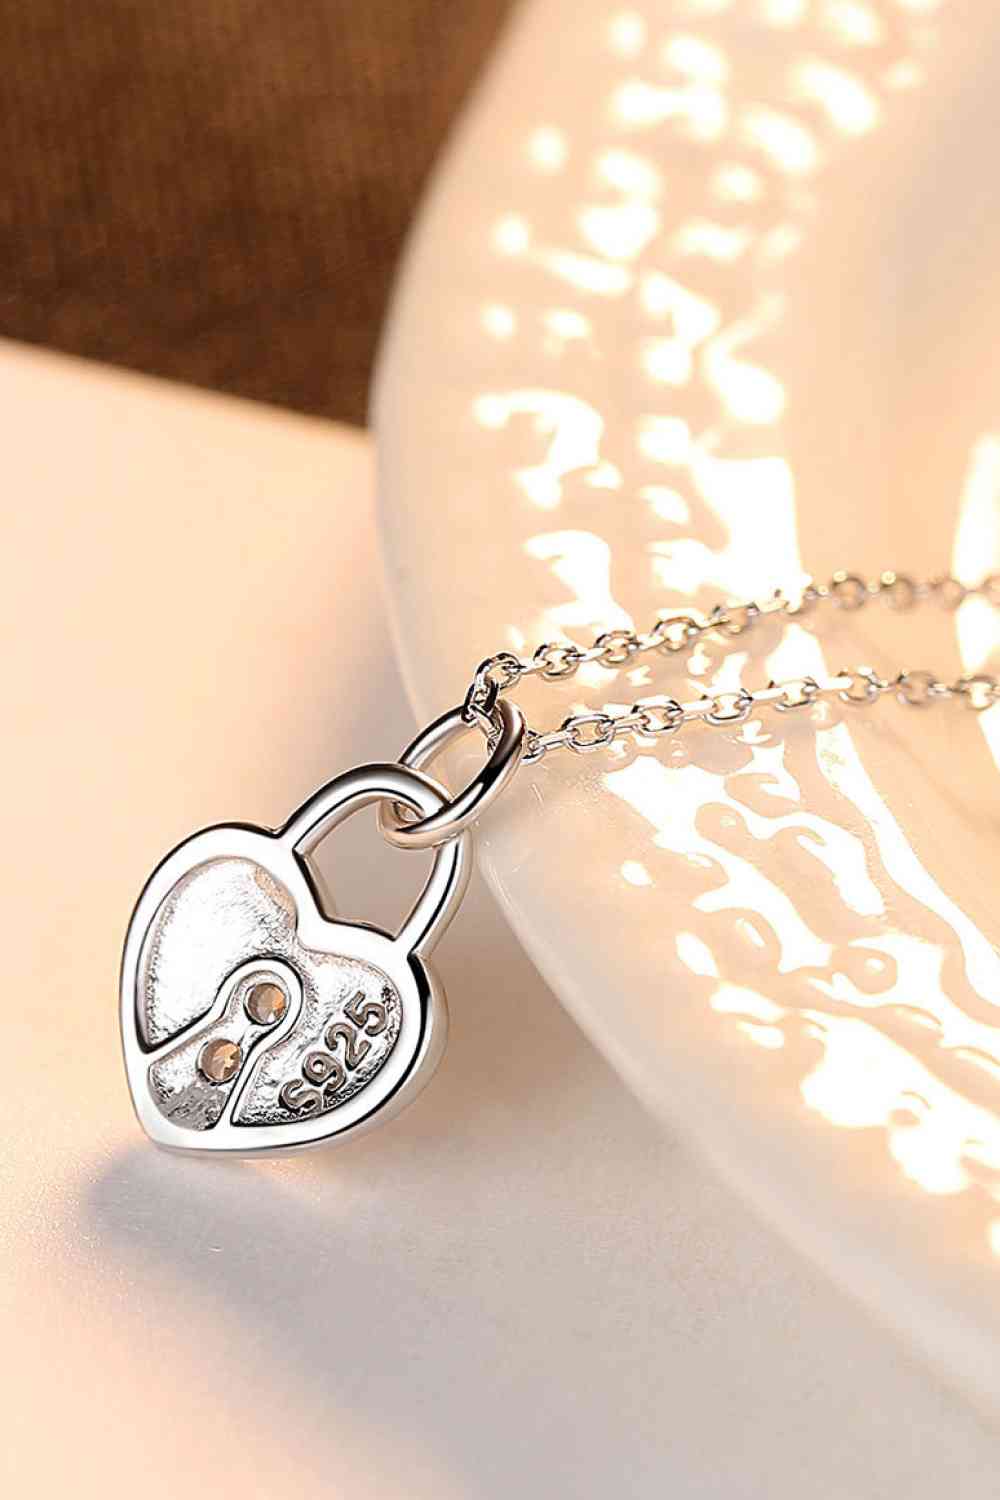 2 Luxurious 925 Sterling Silver Heart Necklace